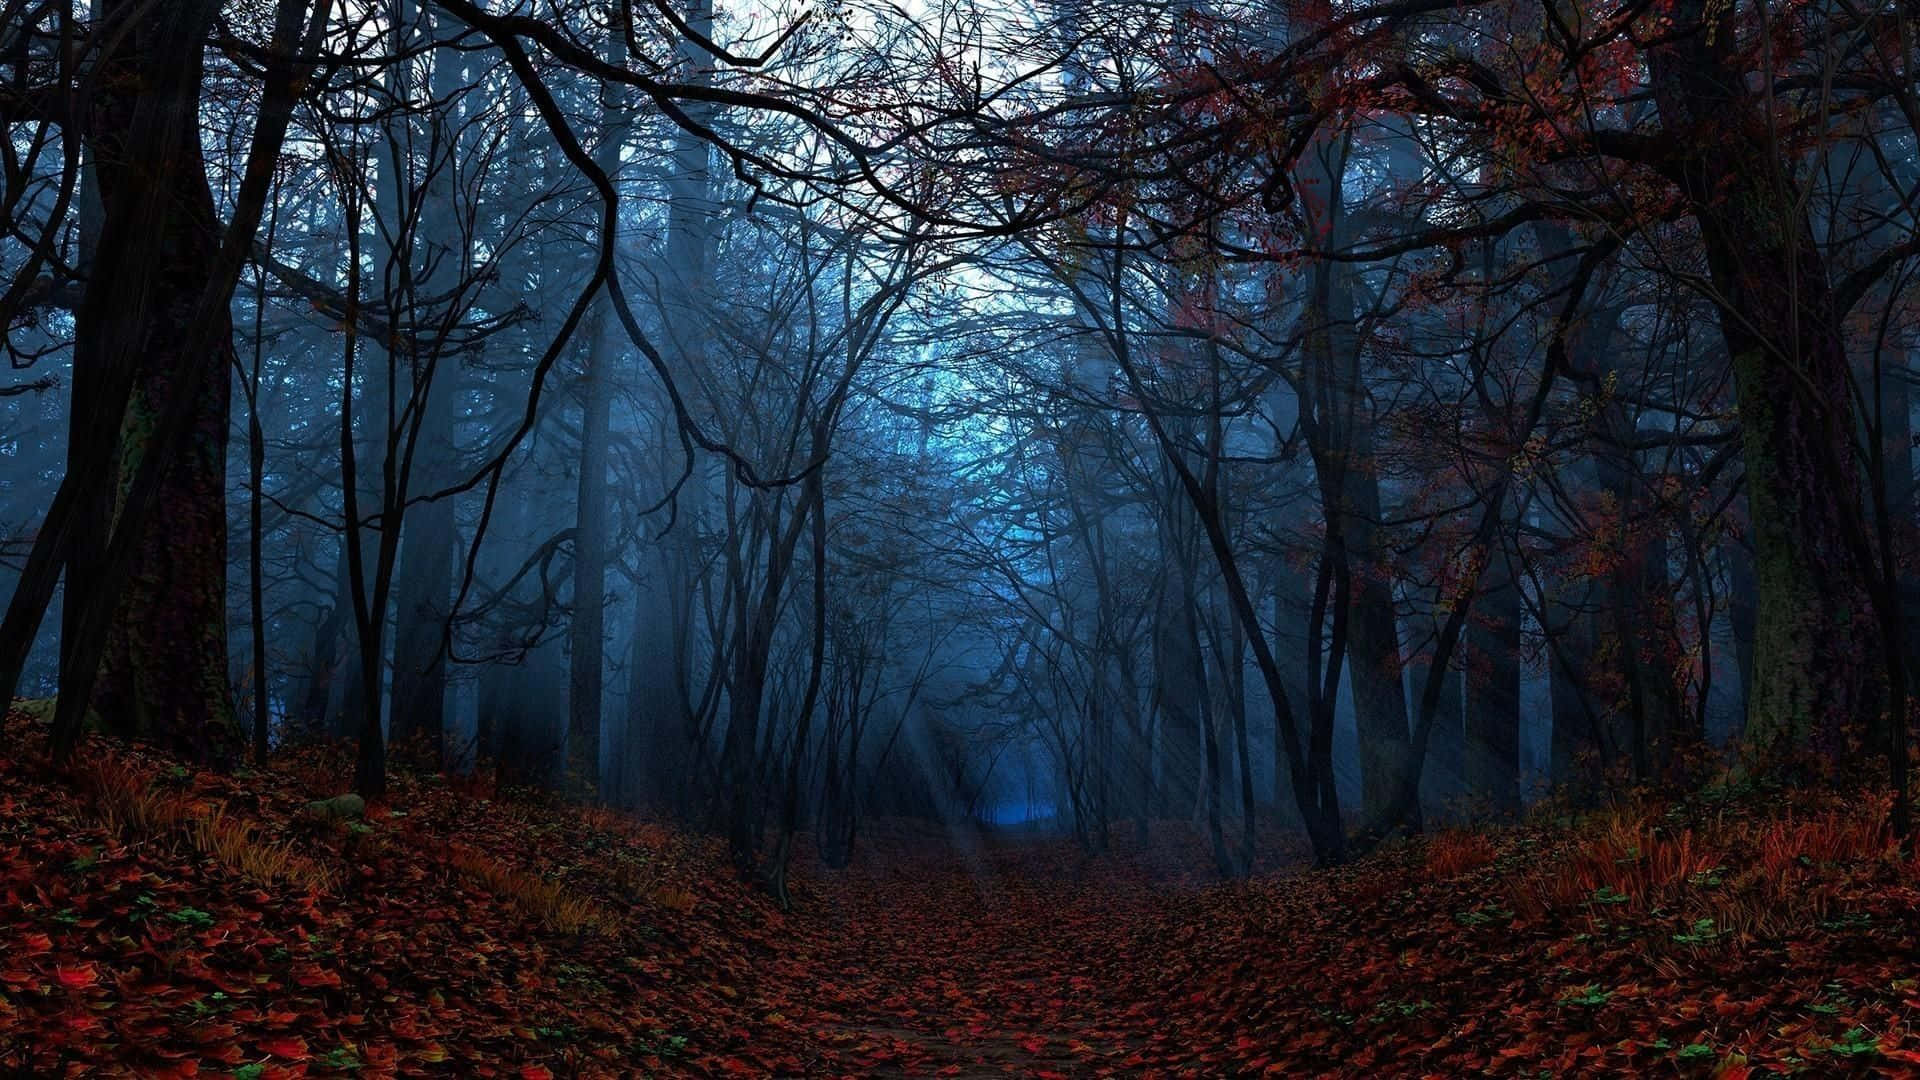 "Majestic Night Forest" Wallpaper